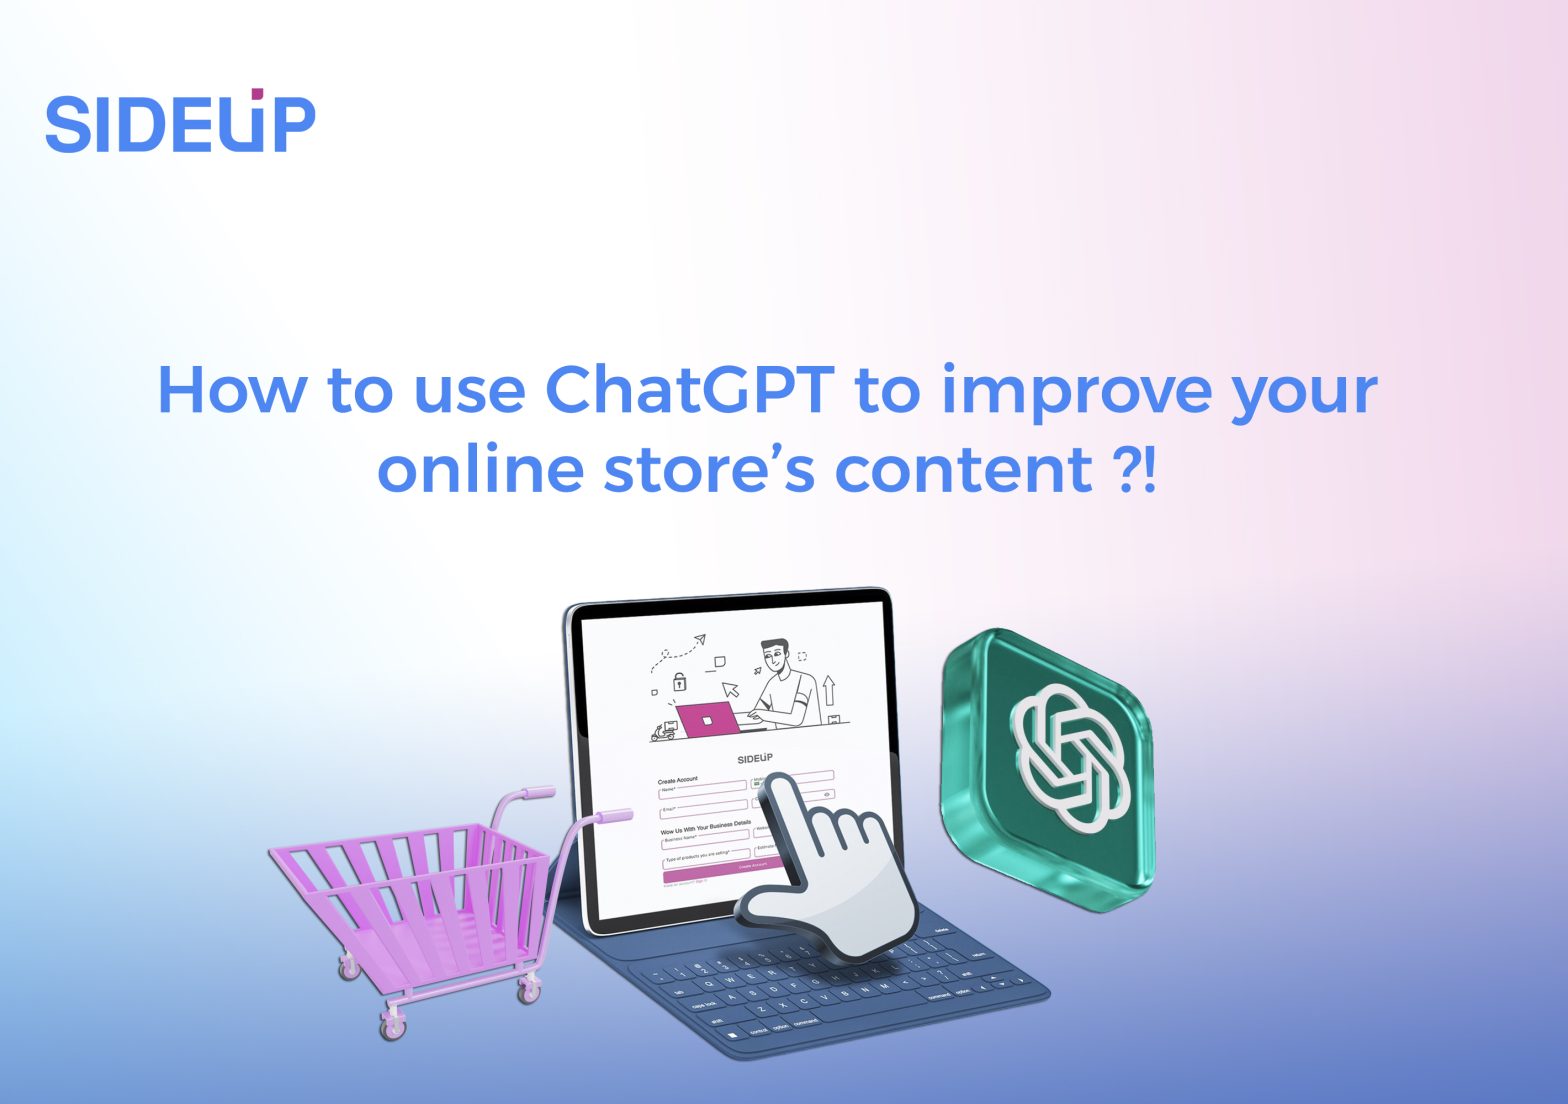 ChatGPT to improve your online store’s content